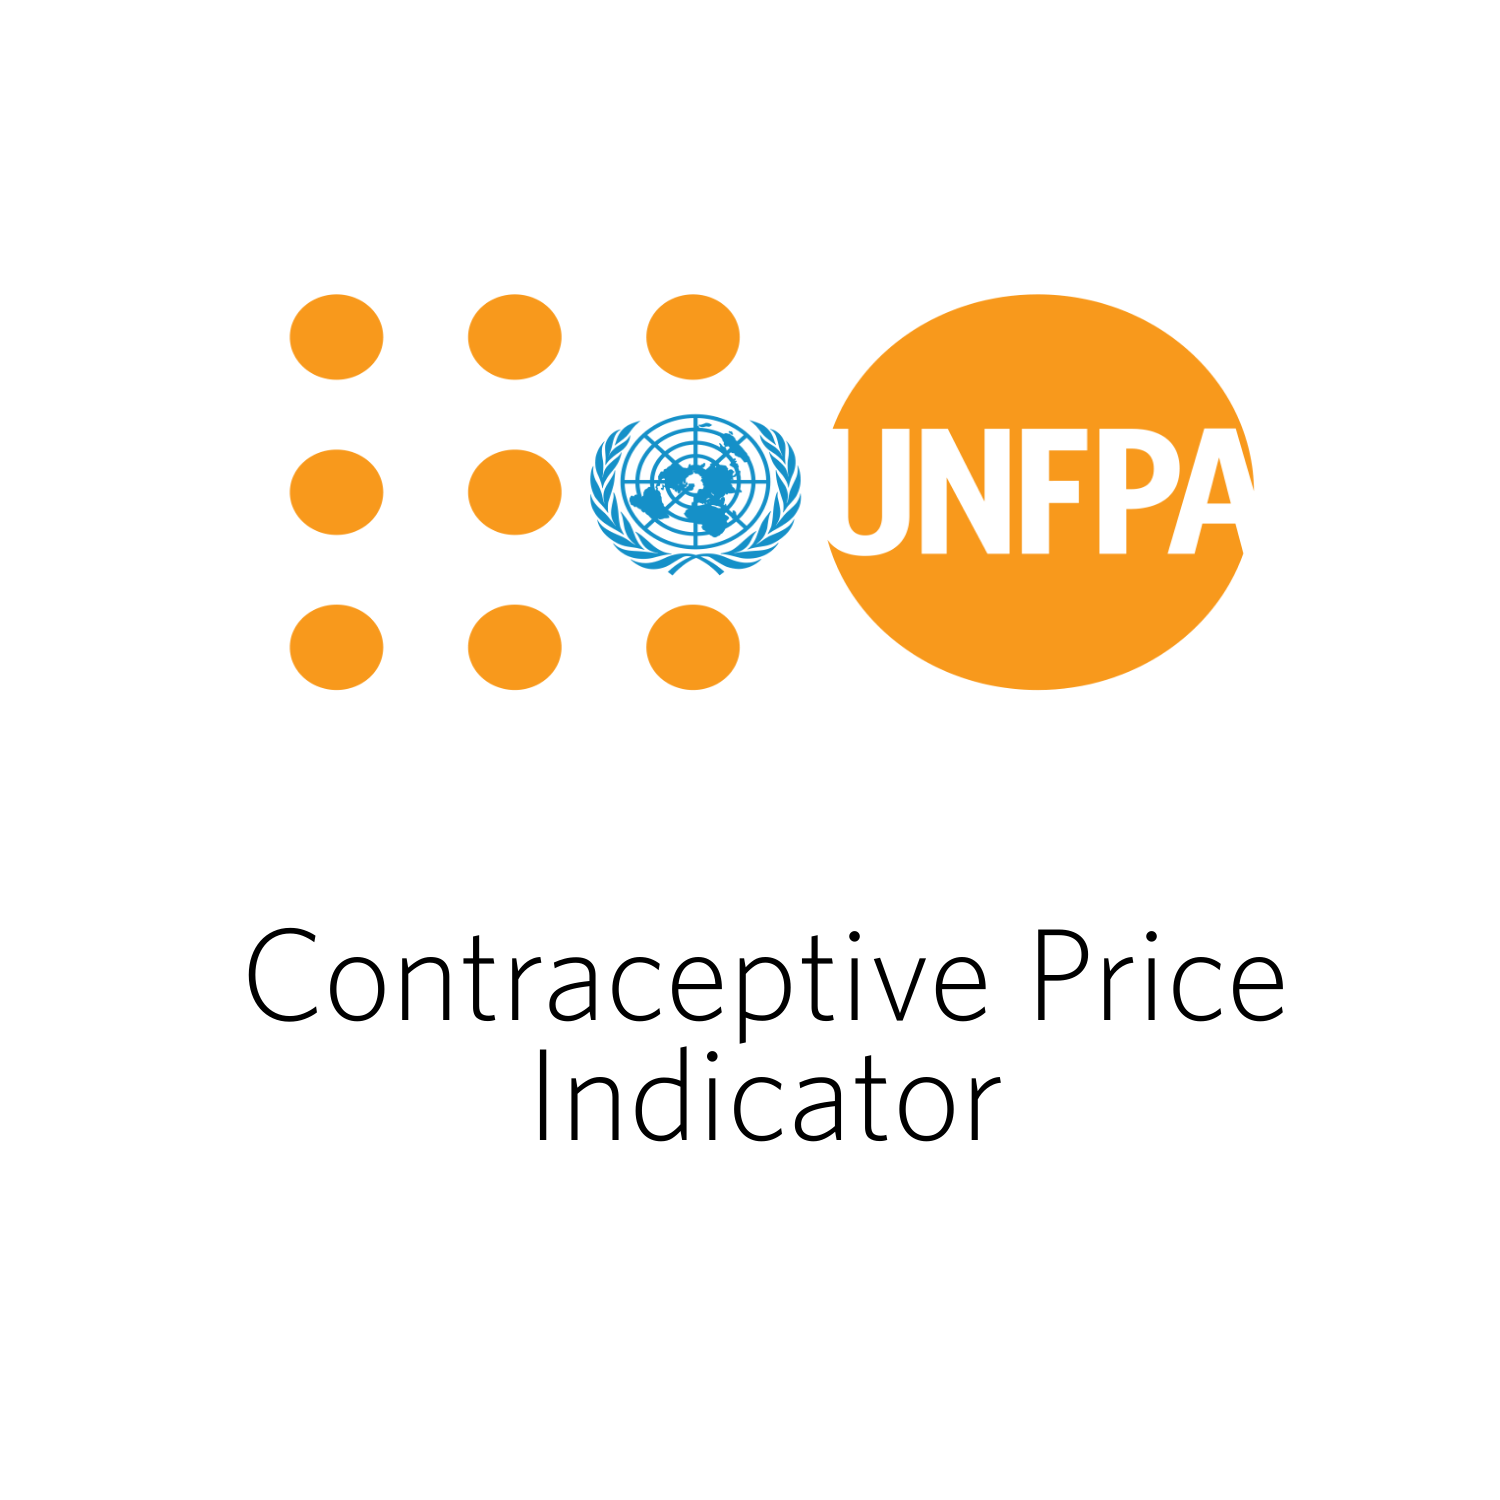 Contraceptive Price Indicator for the year 2019